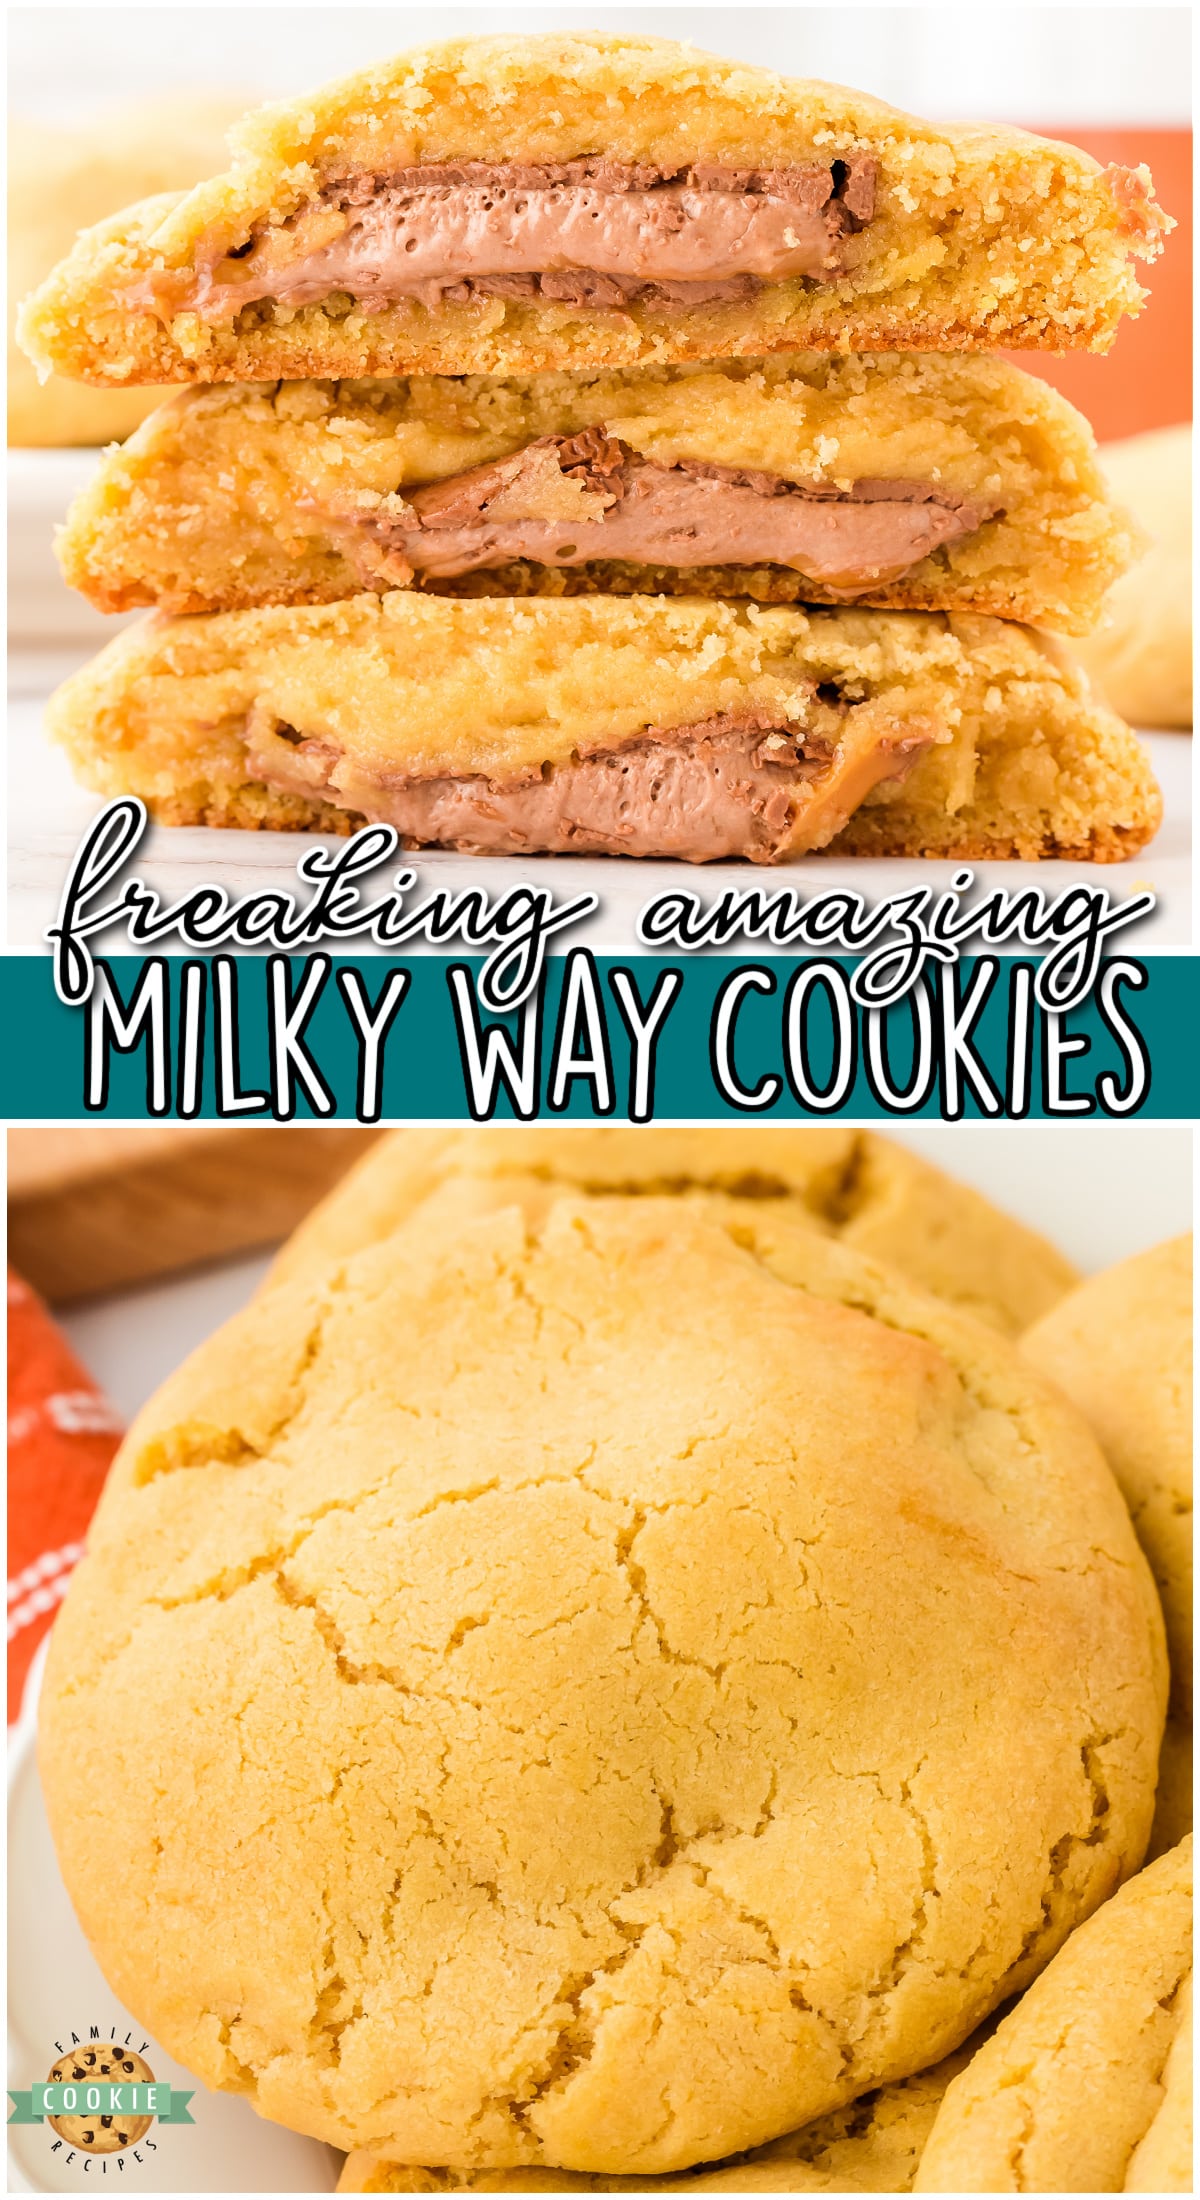 Bakery Style Milky Way Cookies made with sweet cookie dough and stuffed with the classic chocolate caramel nougat candies. Stuffed cookies are a perfect treat!